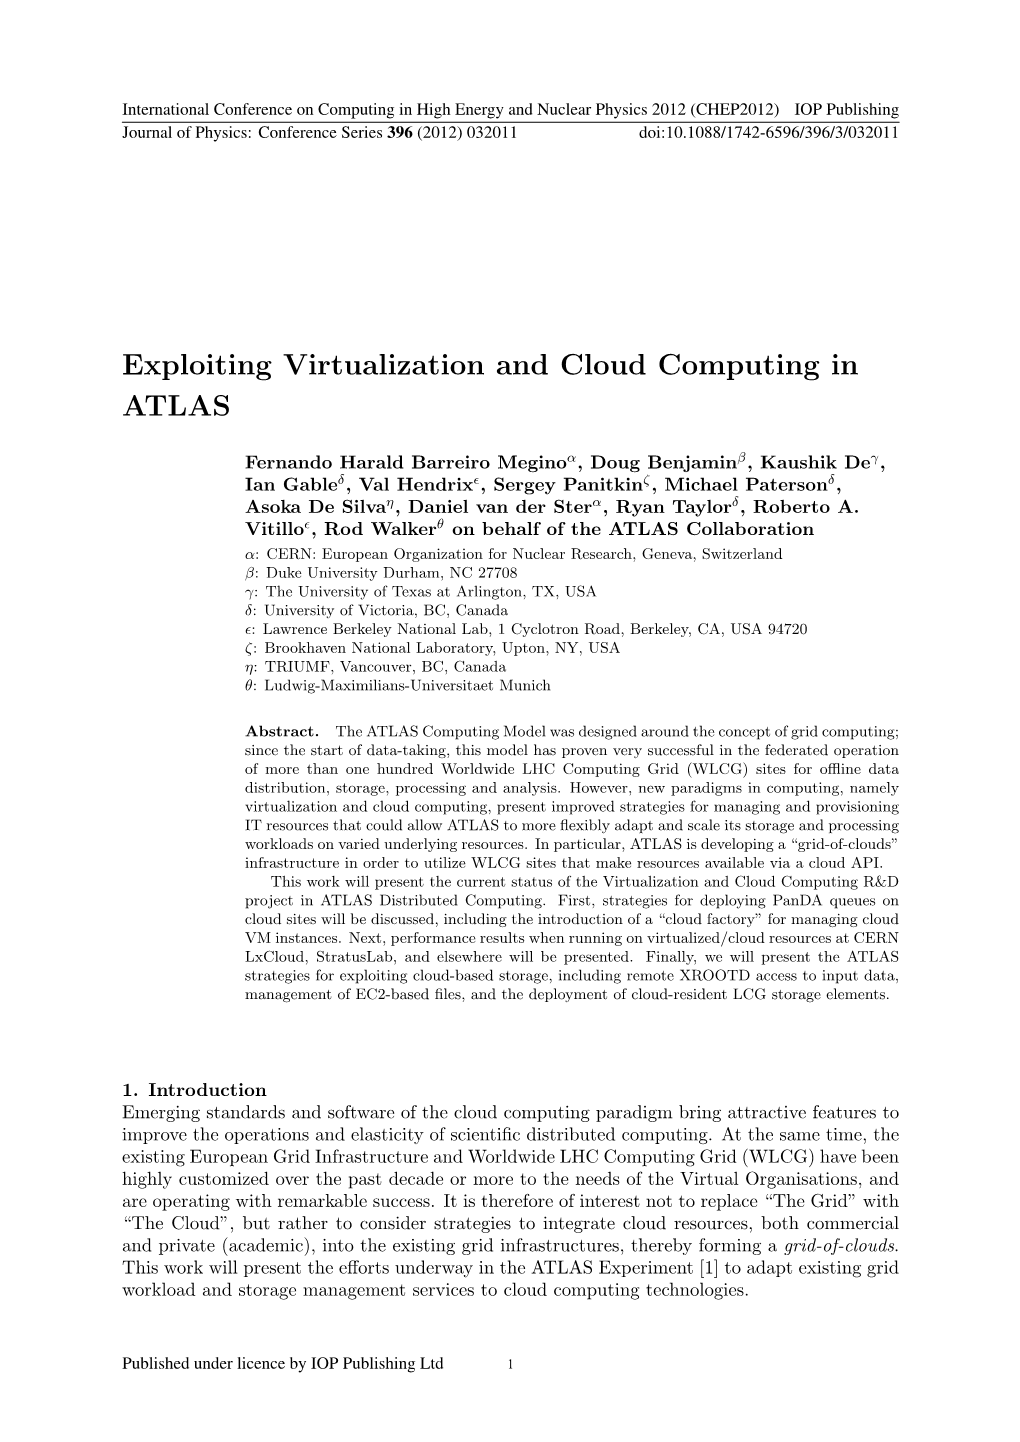 Exploiting Virtualization and Cloud Computing in ATLAS